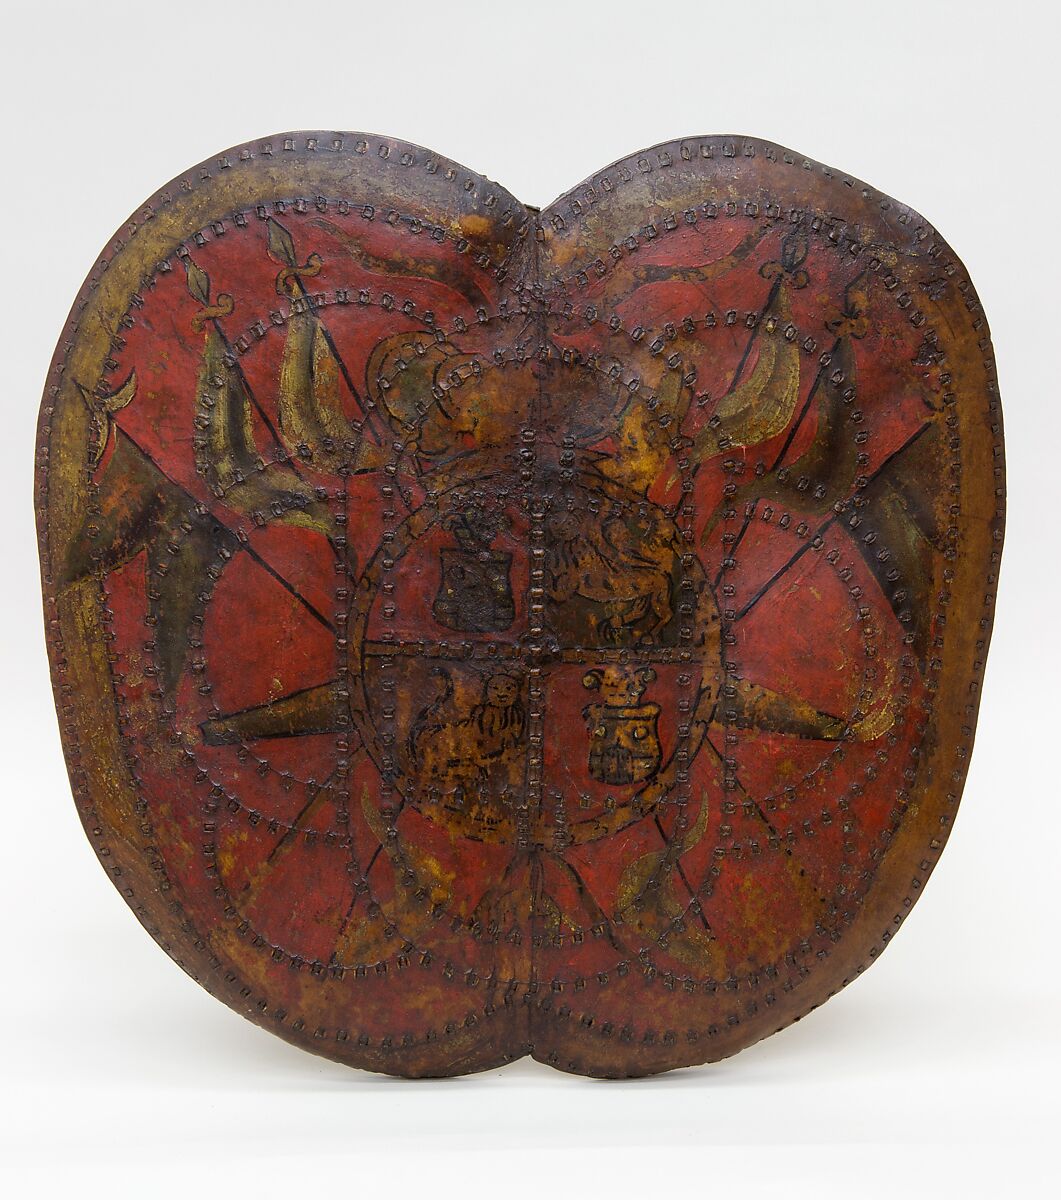 Shield (Adarga), Leather, pigment, Mexican 